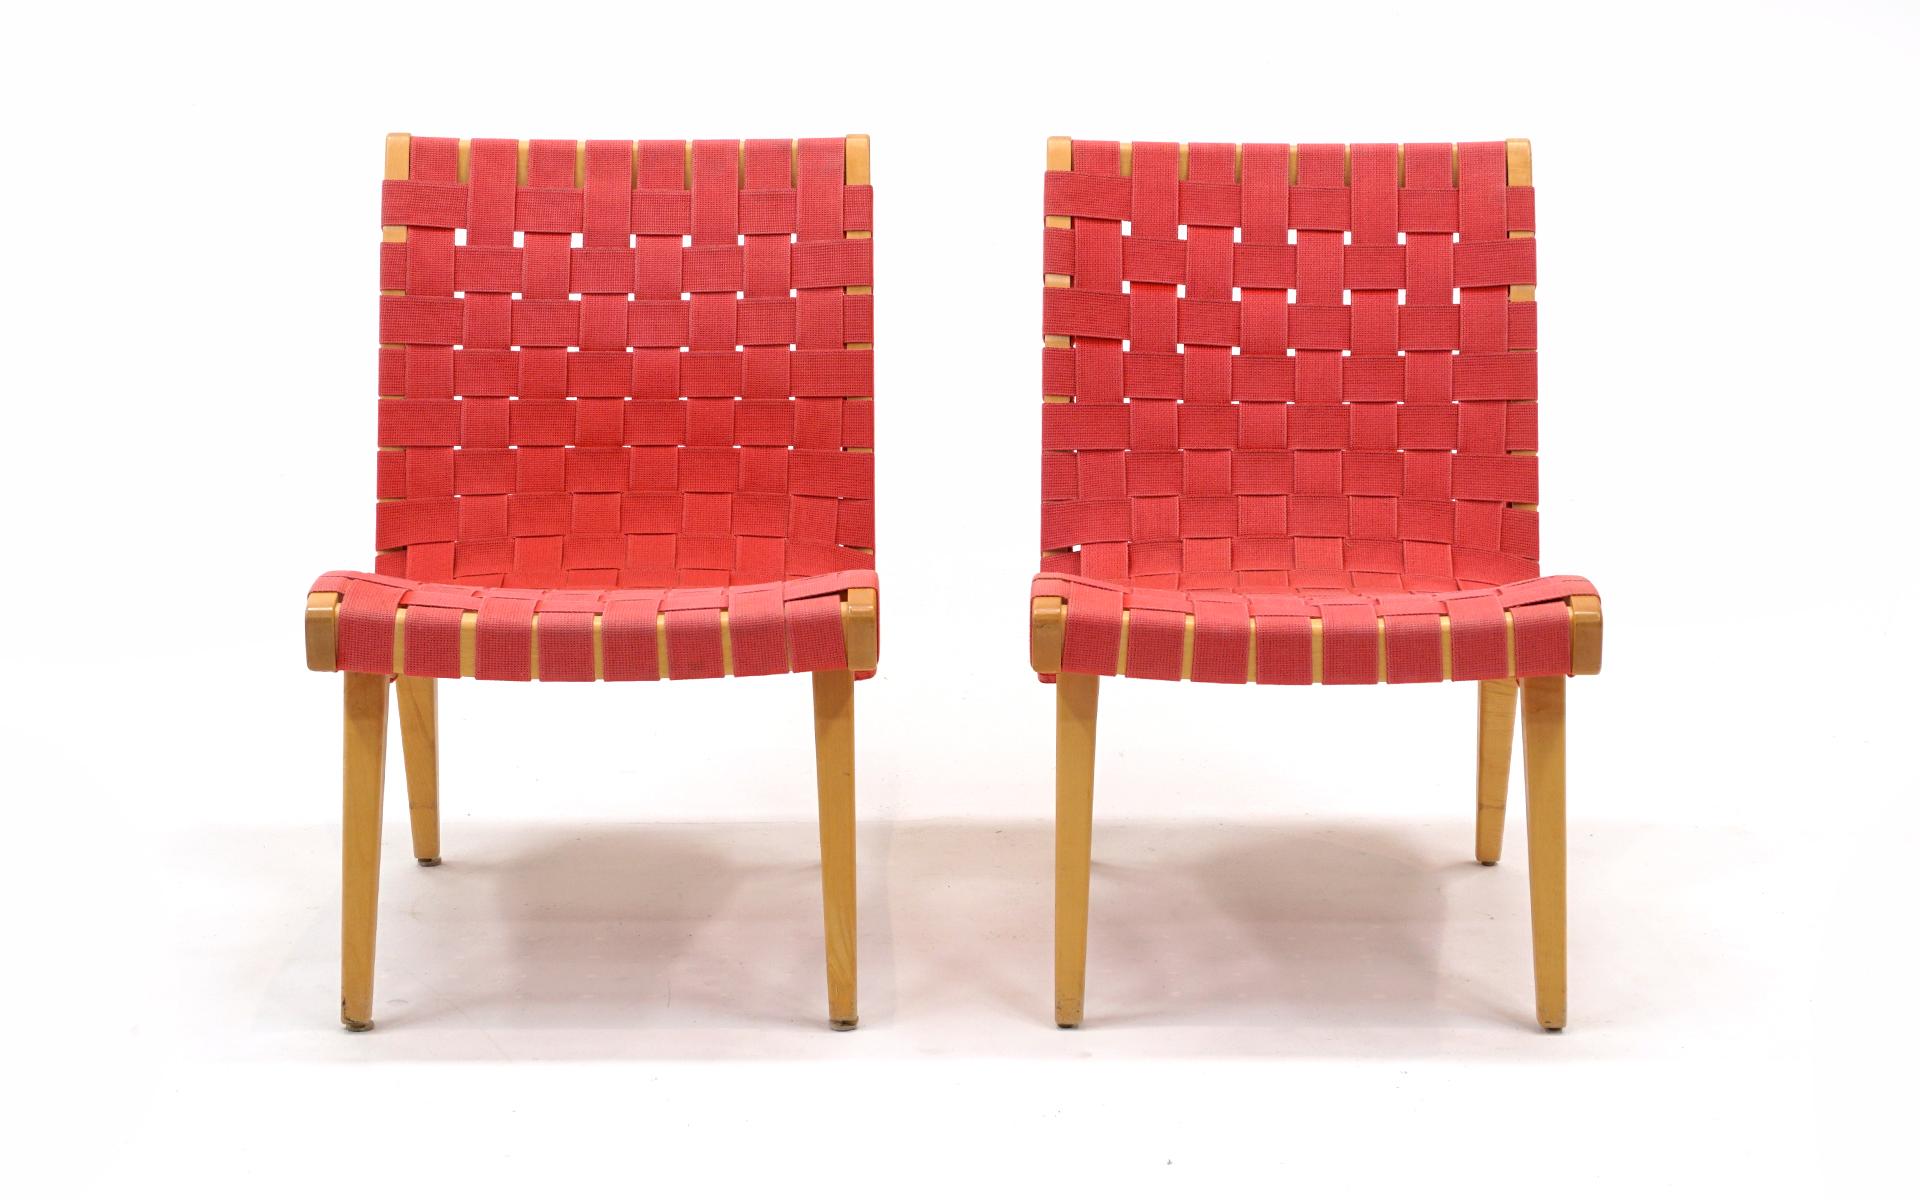 Pair of Jens Risom lounge chairs from his original 1941 design collection for Knoll.  These are more recent production, signed with the Knoll Studio medallion.  These have been used very little but have a fair degree of even sun fading to the